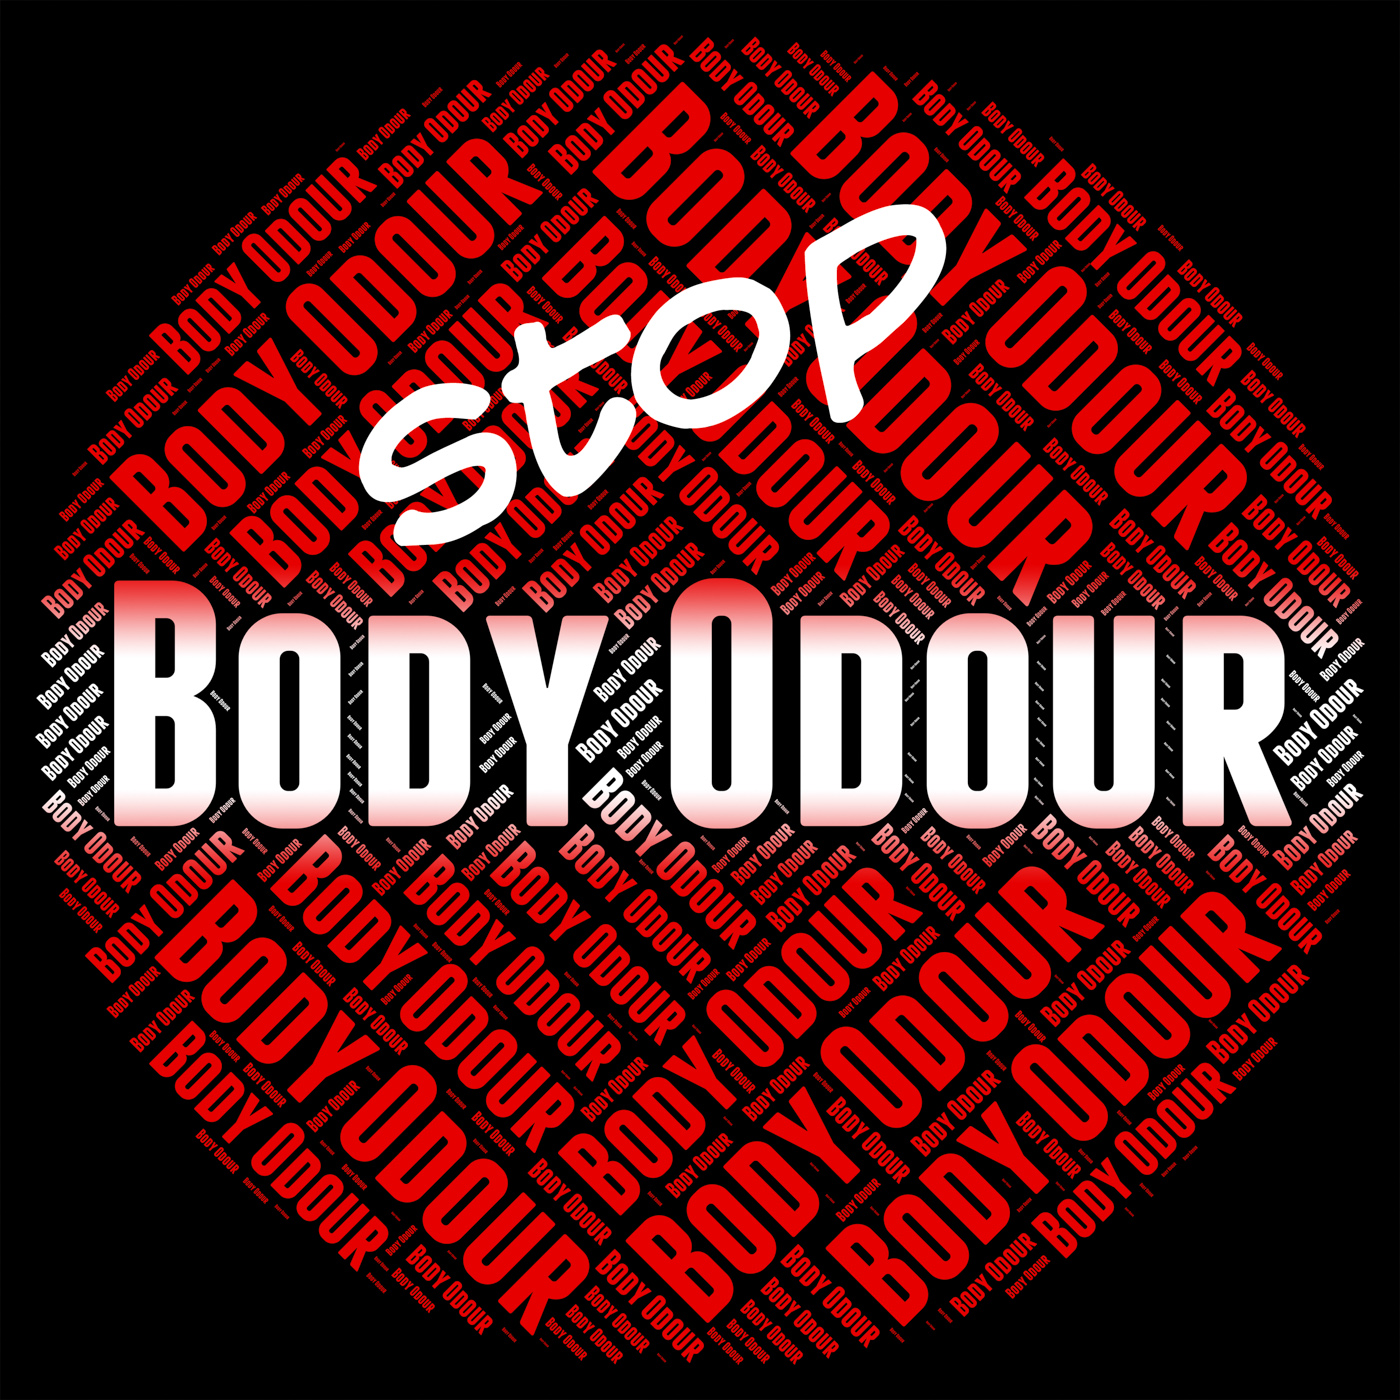 Stop body odour indicates warning sign and aroma photo